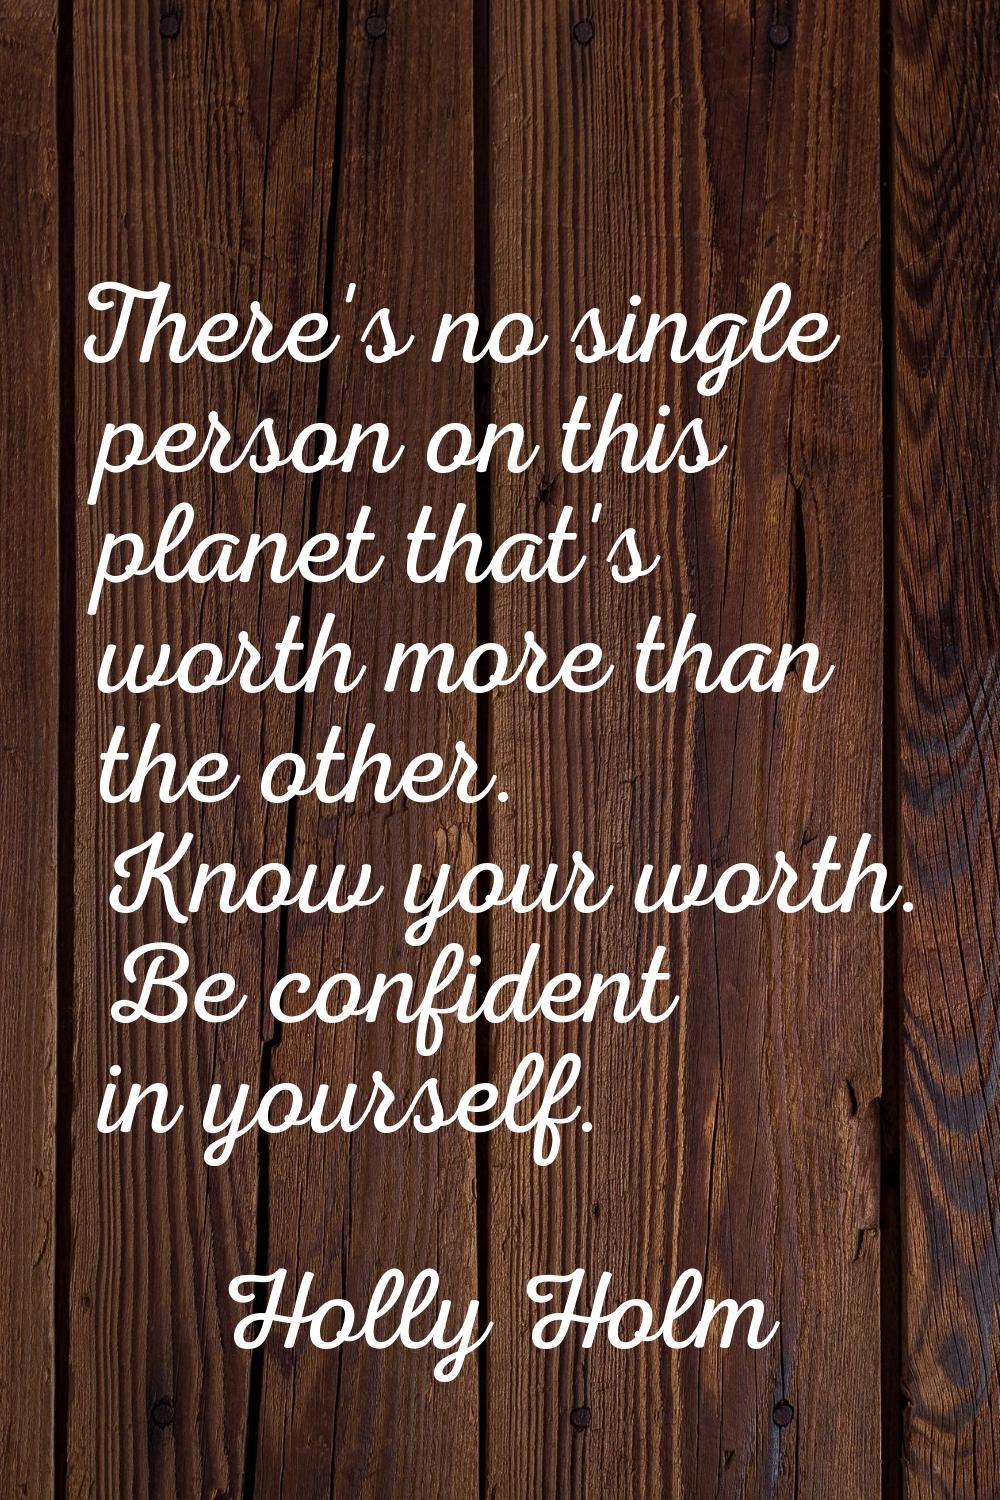 There's no single person on this planet that's worth more than the other. Know your worth. Be confi